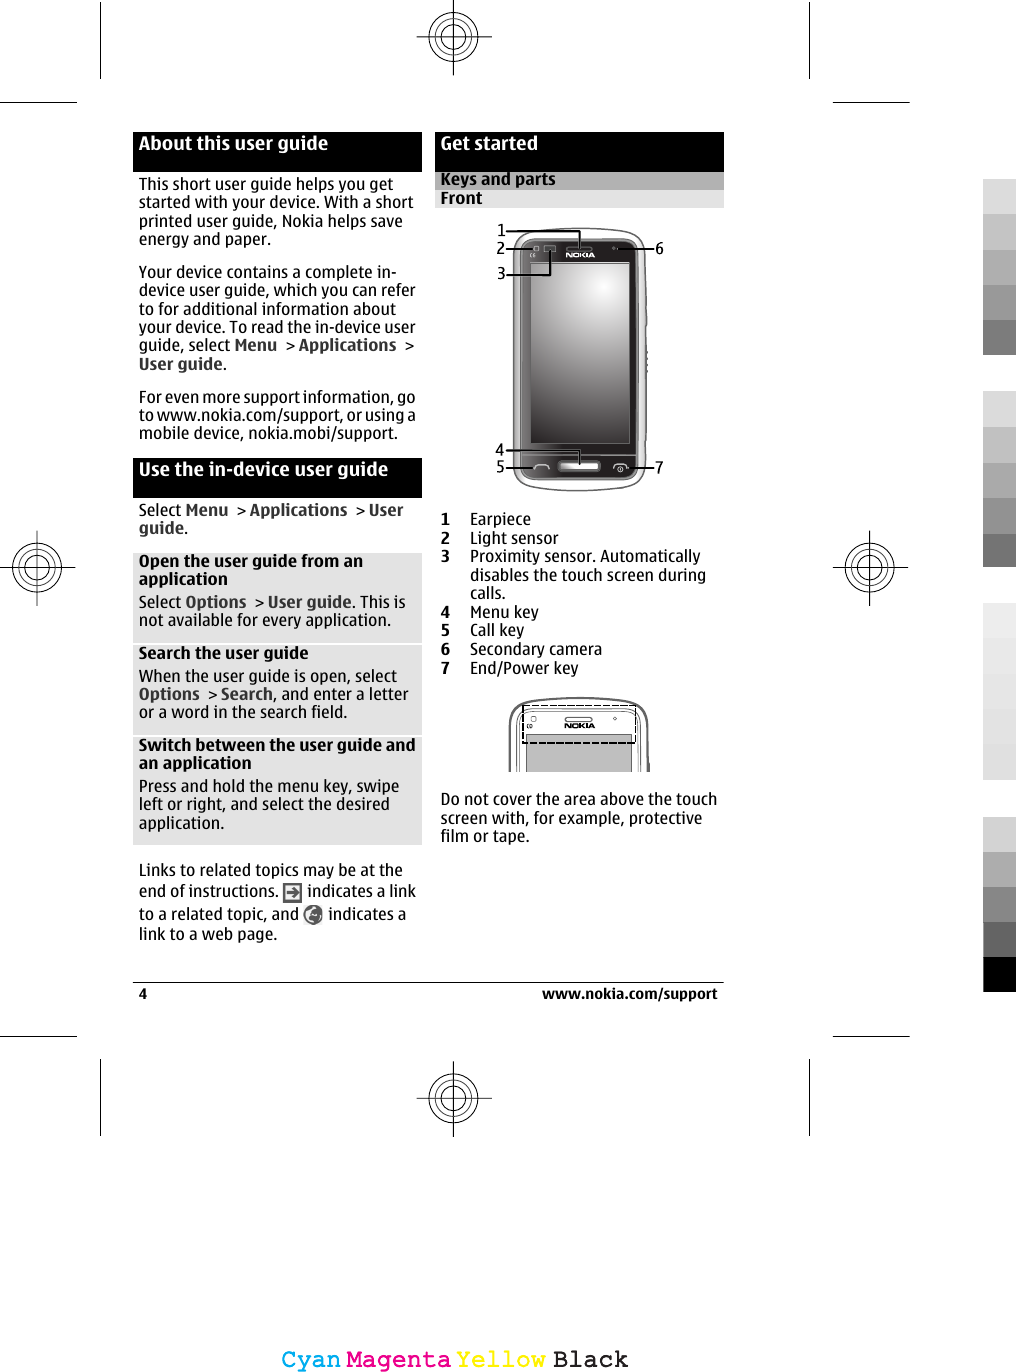 About this user guideThis short user guide helps you getstarted with your device. With a shortprinted user guide, Nokia helps saveenergy and paper.Your device contains a complete in-device user guide, which you can referto for additional information aboutyour device. To read the in-device userguide, select Menu &gt; Applications &gt;User guide.For even more support information, goto www.nokia.com/support, or using amobile device, nokia.mobi/support.Use the in-device user guideSelect Menu &gt; Applications &gt; Userguide.Open the user guide from anapplicationSelect Options &gt; User guide. This isnot available for every application.Search the user guideWhen the user guide is open, selectOptions &gt; Search, and enter a letteror a word in the search field.Switch between the user guide andan applicationPress and hold the menu key, swipeleft or right, and select the desiredapplication.Links to related topics may be at theend of instructions.   indicates a linkto a related topic, and   indicates alink to a web page.Get startedKeys and partsFront1Earpiece2Light sensor3Proximity sensor. Automaticallydisables the touch screen duringcalls.4Menu key5Call key6Secondary camera7End/Power keyDo not cover the area above the touchscreen with, for example, protectivefilm or tape.4 www.nokia.com/supportCyanCyanMagentaMagentaYellowYellowBlackBlack